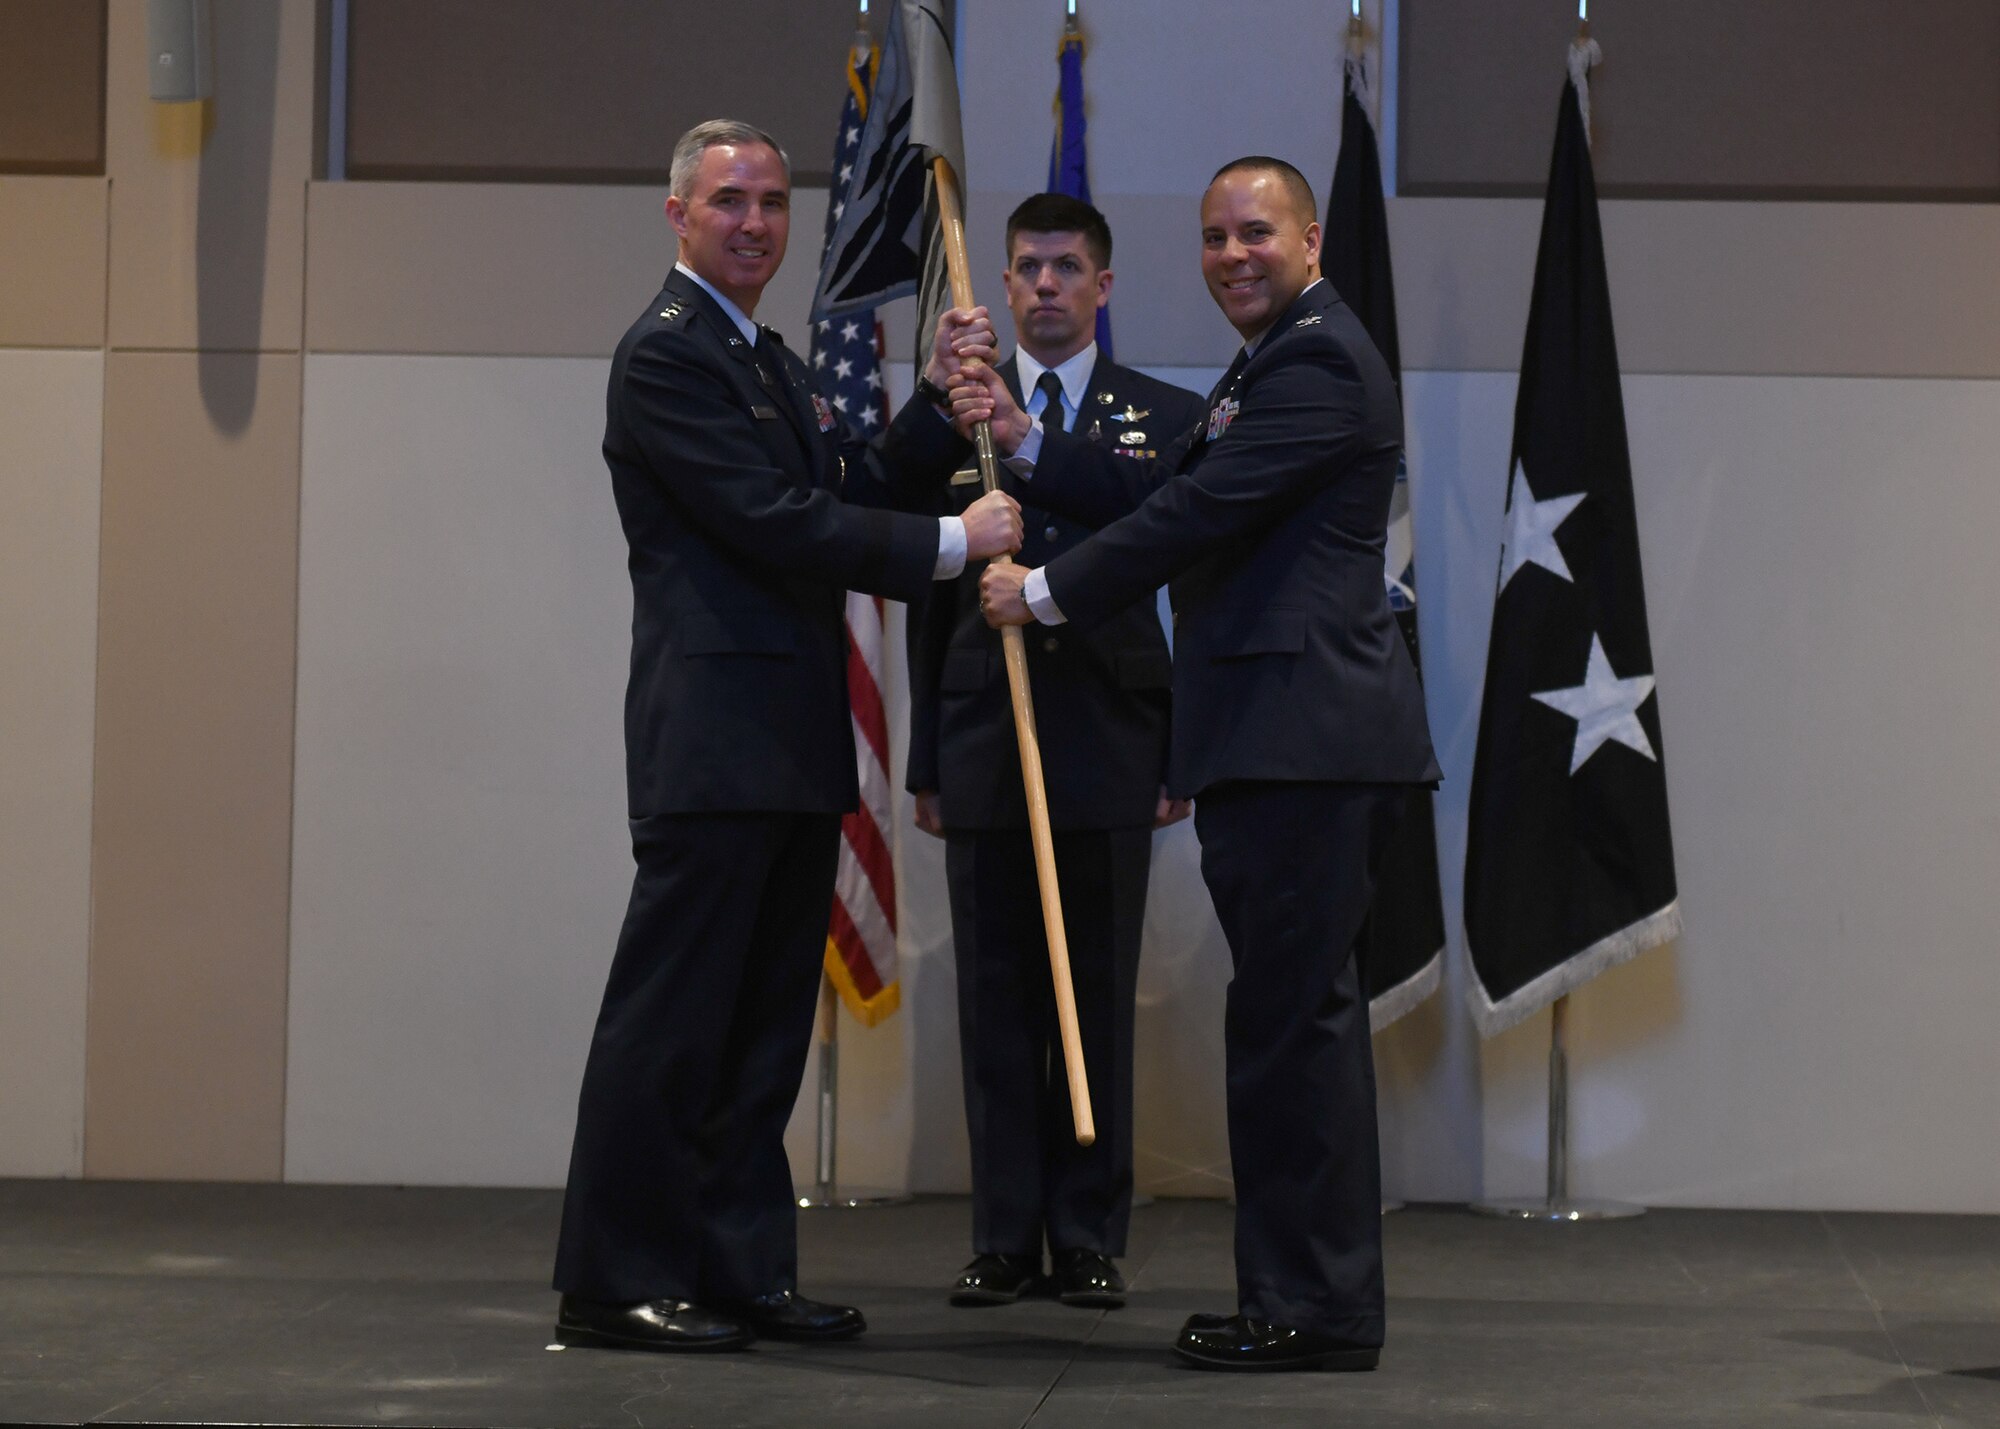 Col. Miguel Cruz, incoming Space Delta 4 commander, receives the guidon from Lt. Gen. Stephen Whiting, Space Operations Command commander, during a change of command ceremony at Buckley Space Force Base, Colo., July 15, 2021. The passing of the guidon is a military tradition that symbolizes a transfer of command and commemorates past leadership and success of the outgoing commander. (U.S. Space Force photo by Airman 1st Class Haley N. Blevins)